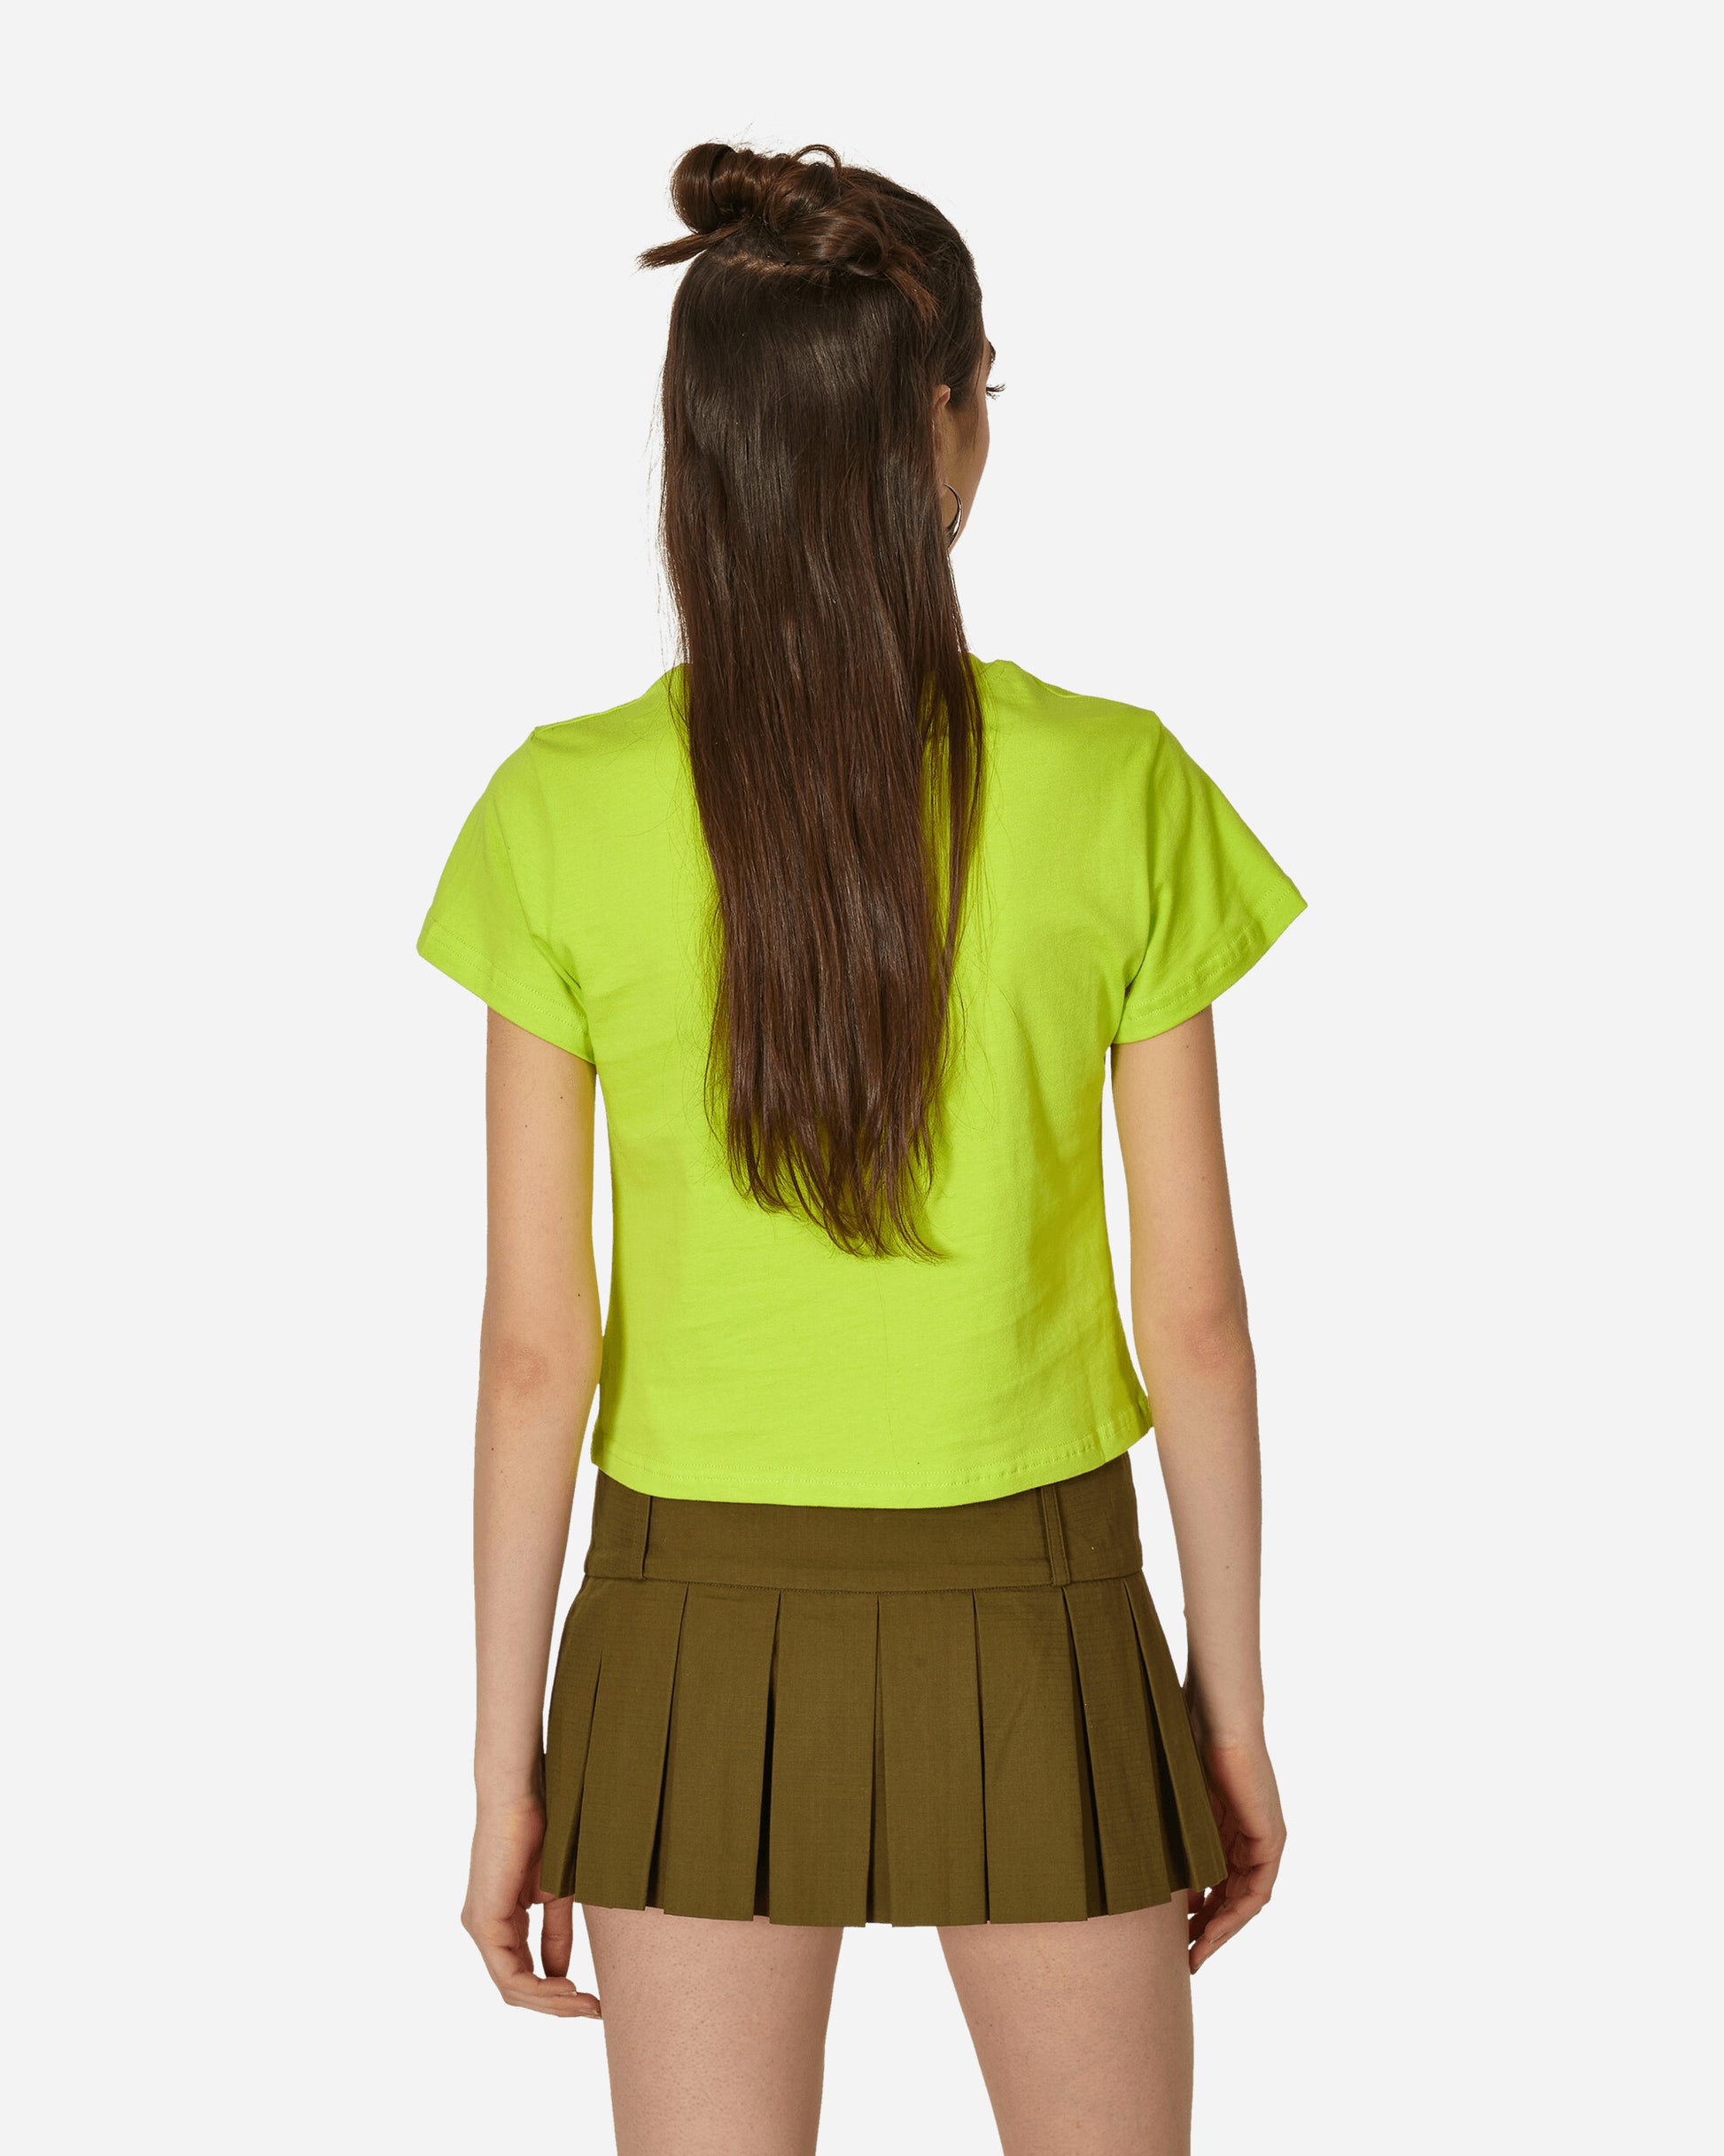 Nii Hai Wmns High Star Baby Tee In Neon Yellow Yellow T-Shirts Cropped TPS-HSB YLW